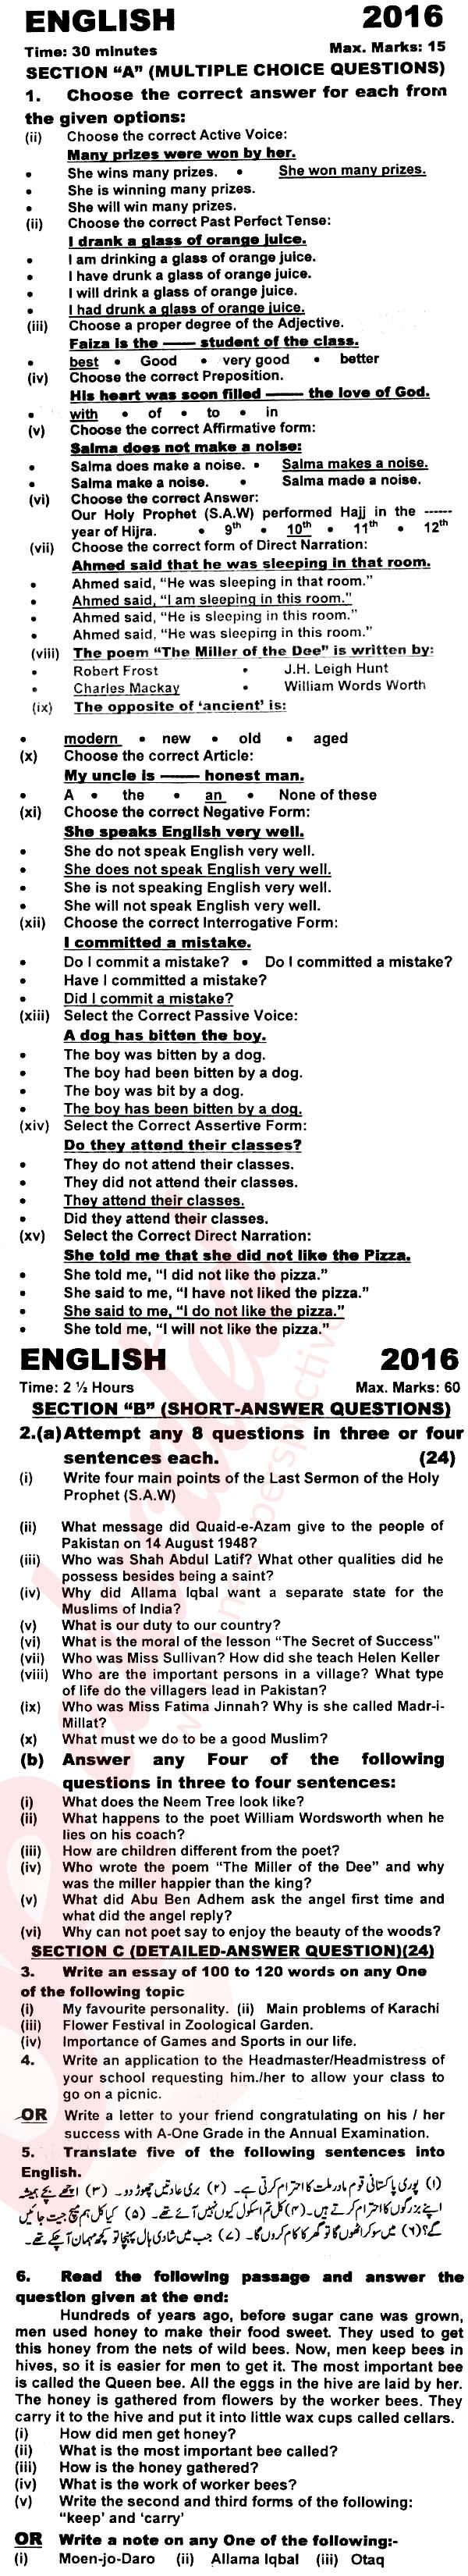 English 9th class Past Paper Group 1 KPBTE 2016